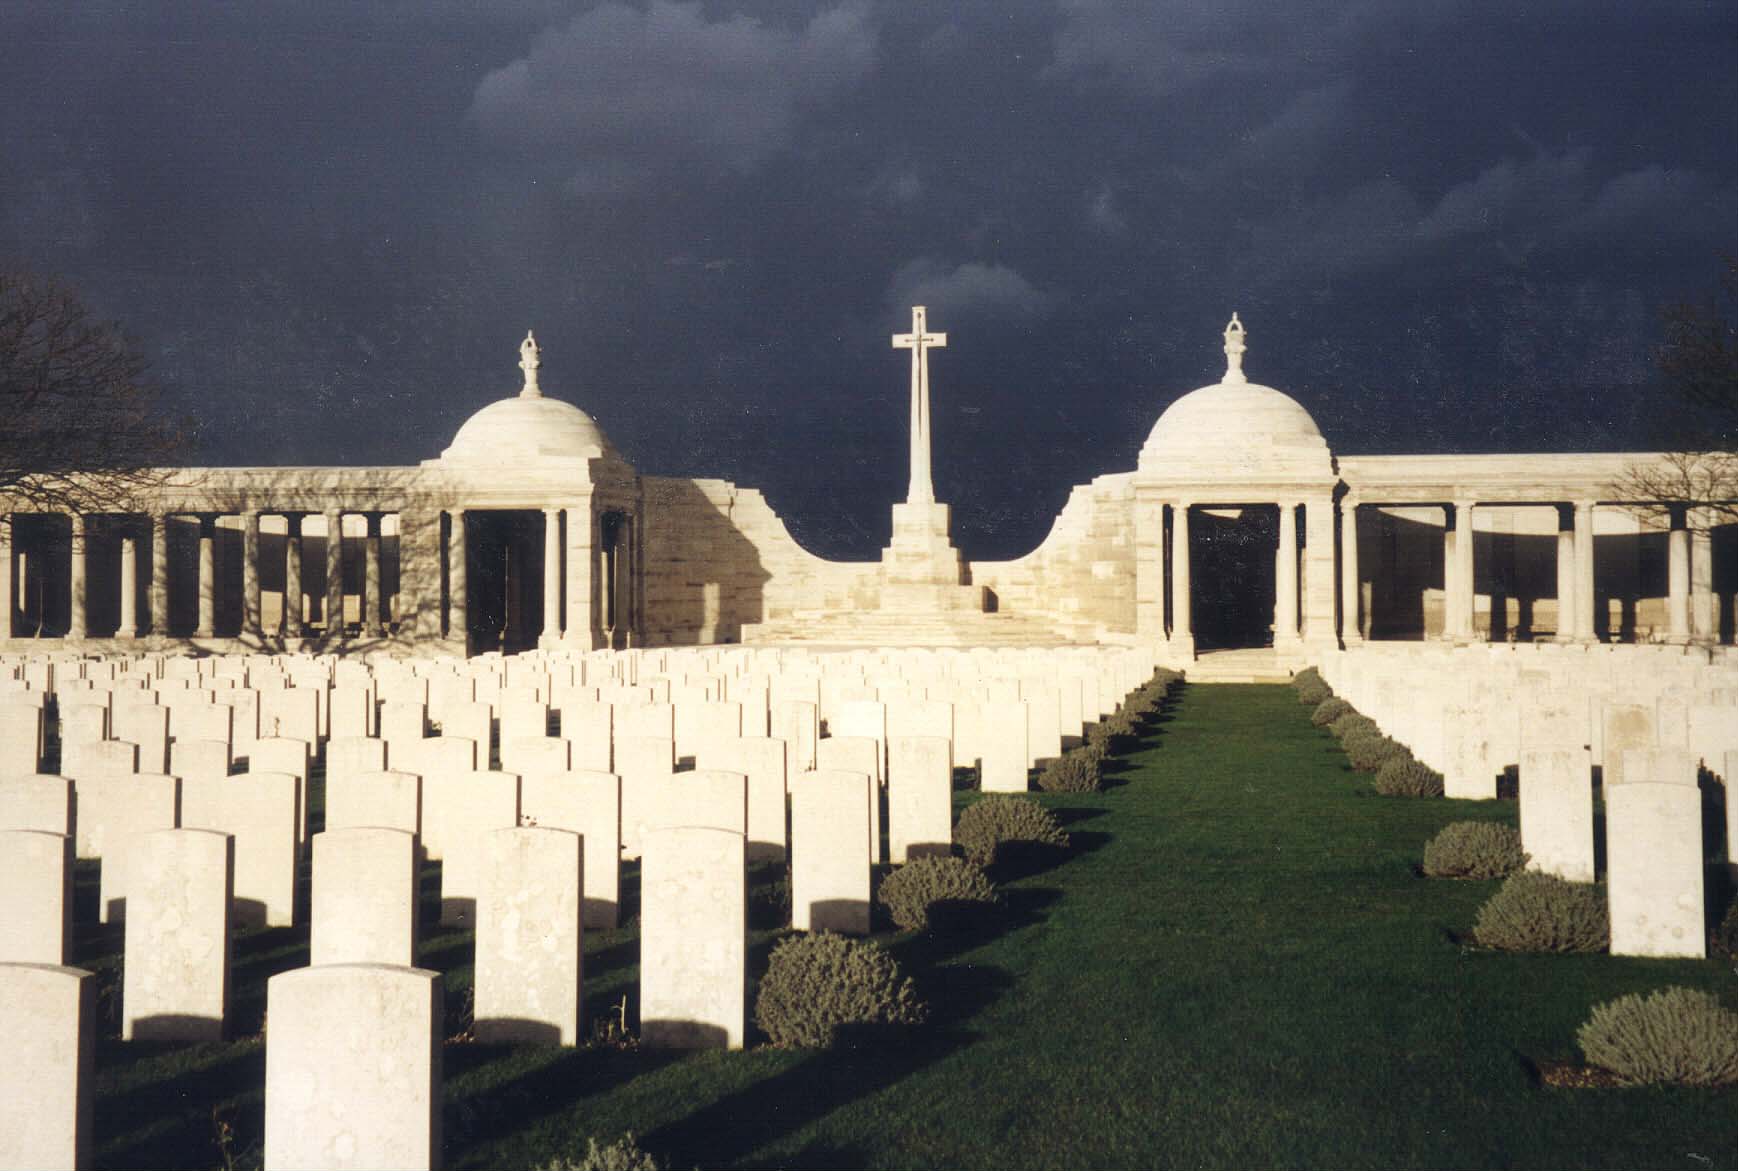 The Loos Memorial in the background with rows of gravestones in front